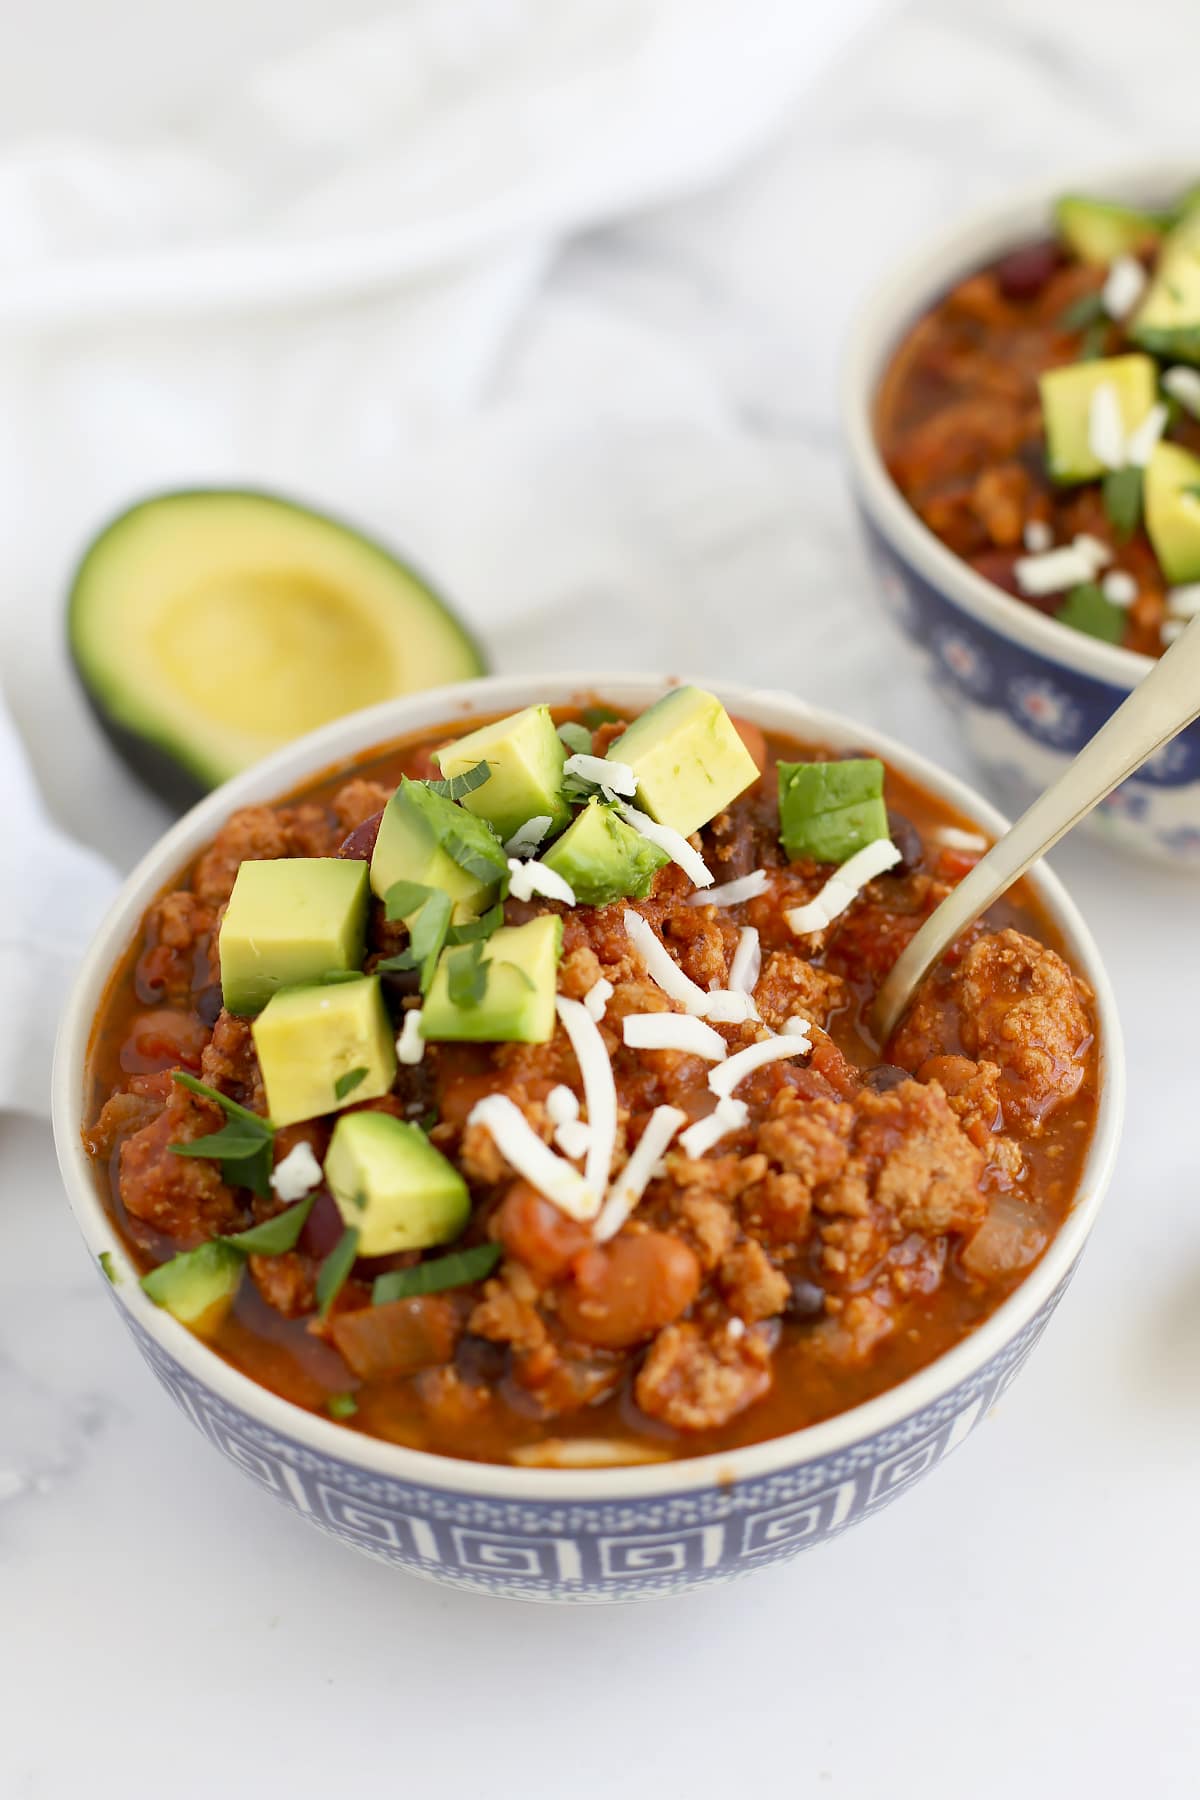 A close up image of homemade chili topped with avocado and cheese with a gold spoon.